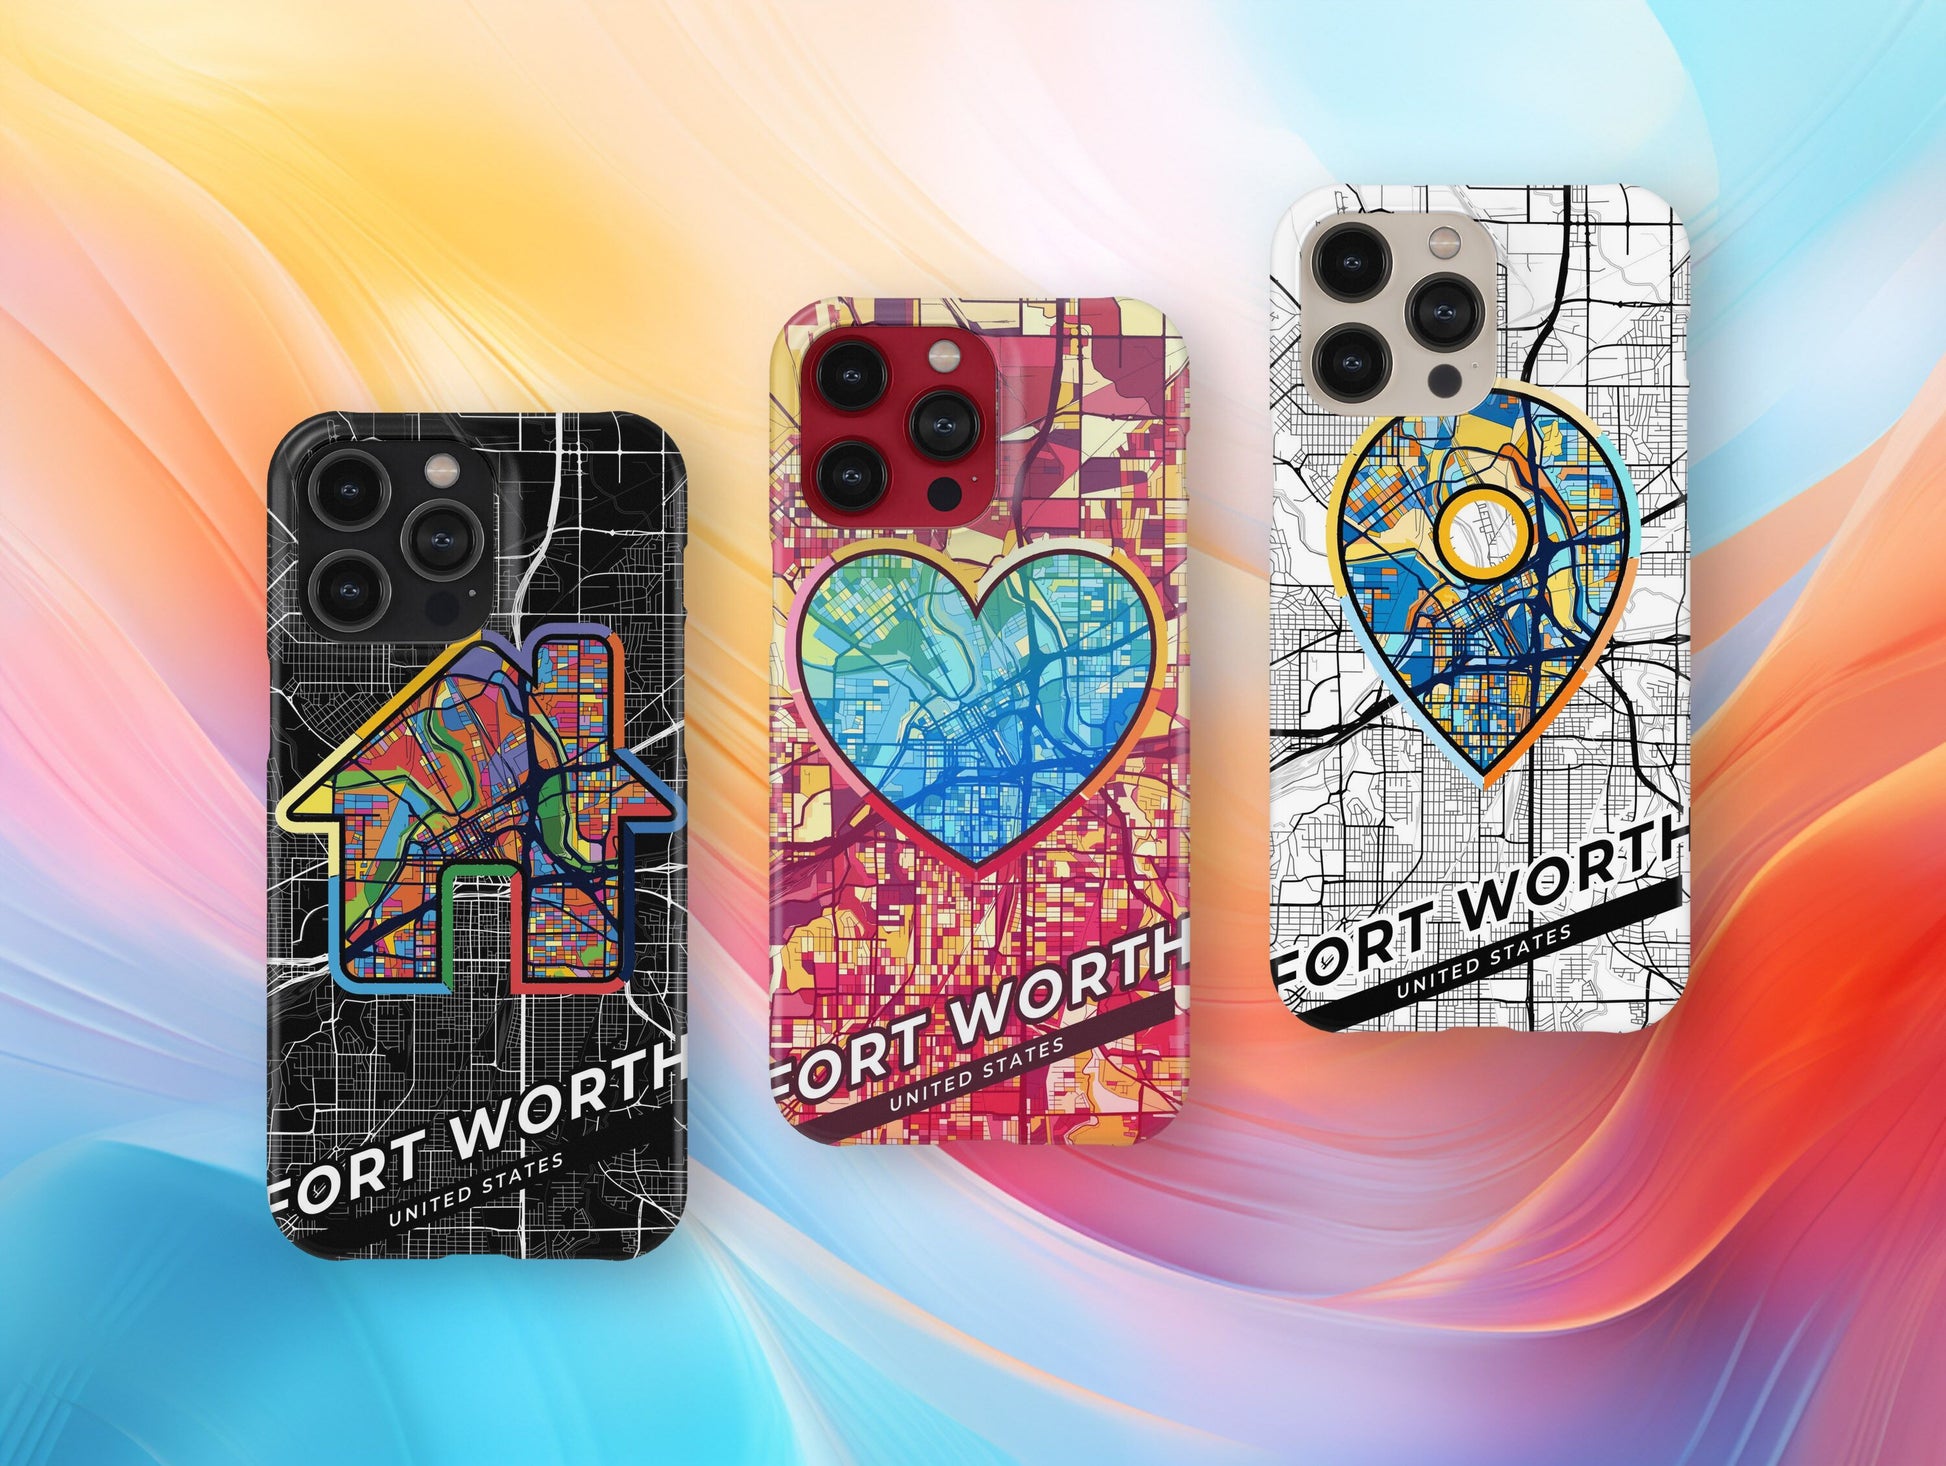 Fort Worth Texas slim phone case with colorful icon. Birthday, wedding or housewarming gift. Couple match cases.